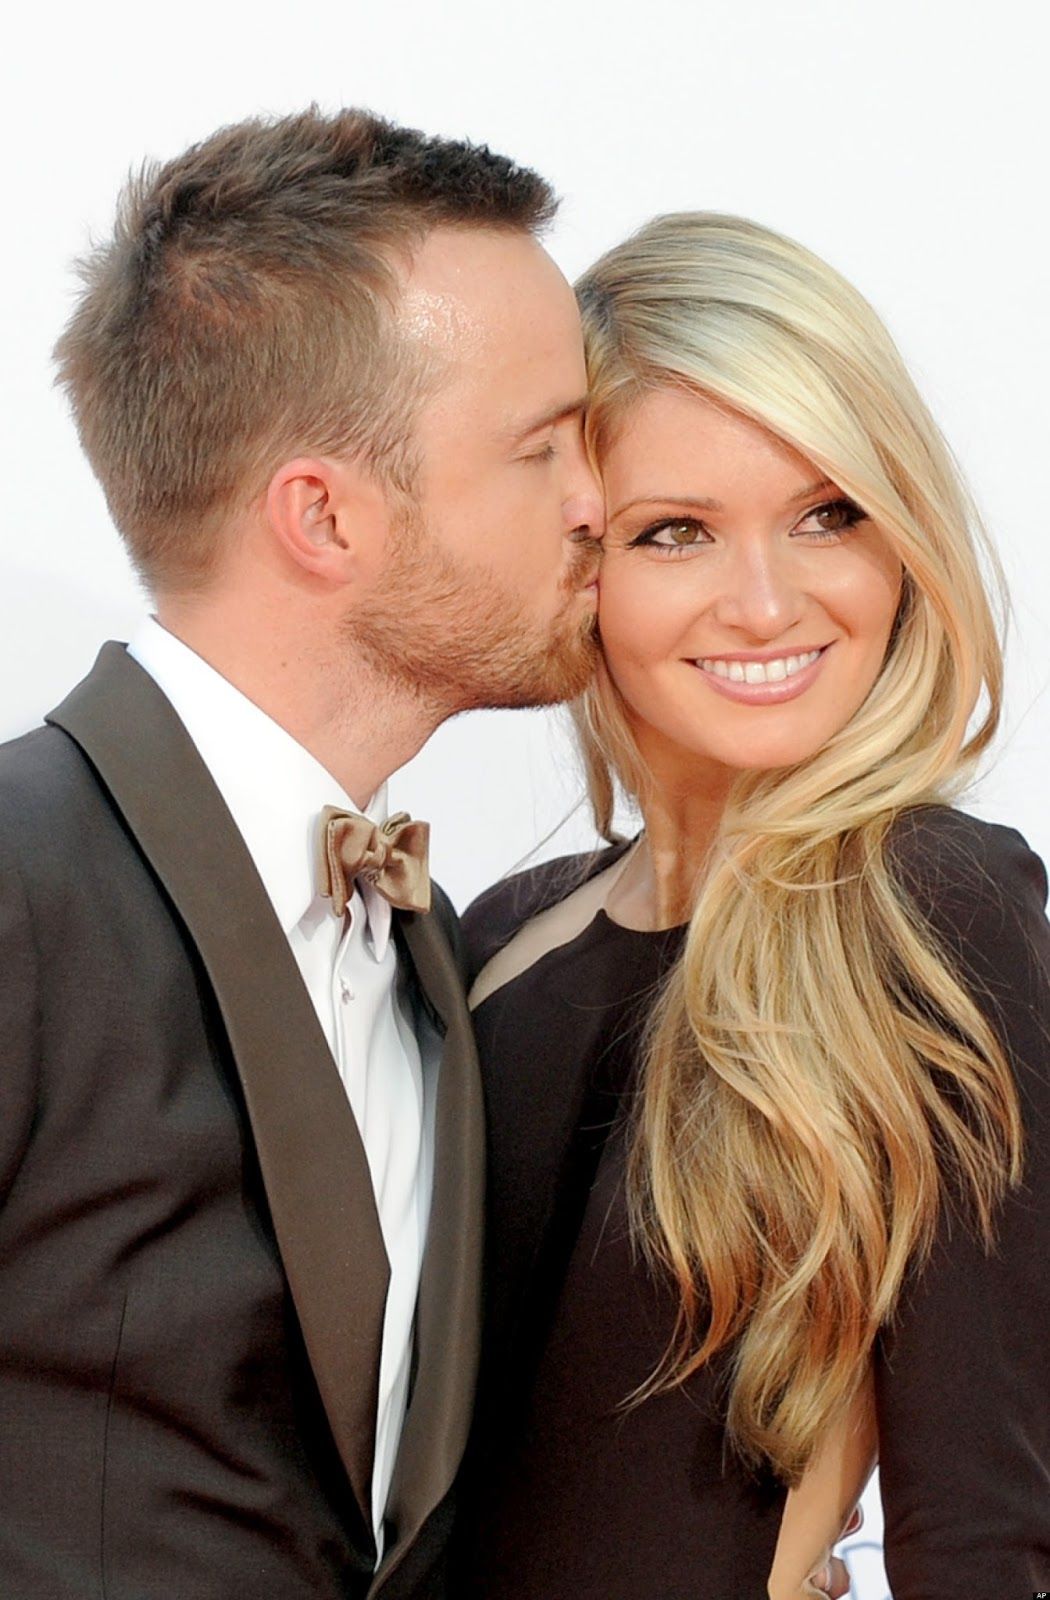 Aaron Paul opines: I’m happy with my wife, but don’t deserve her